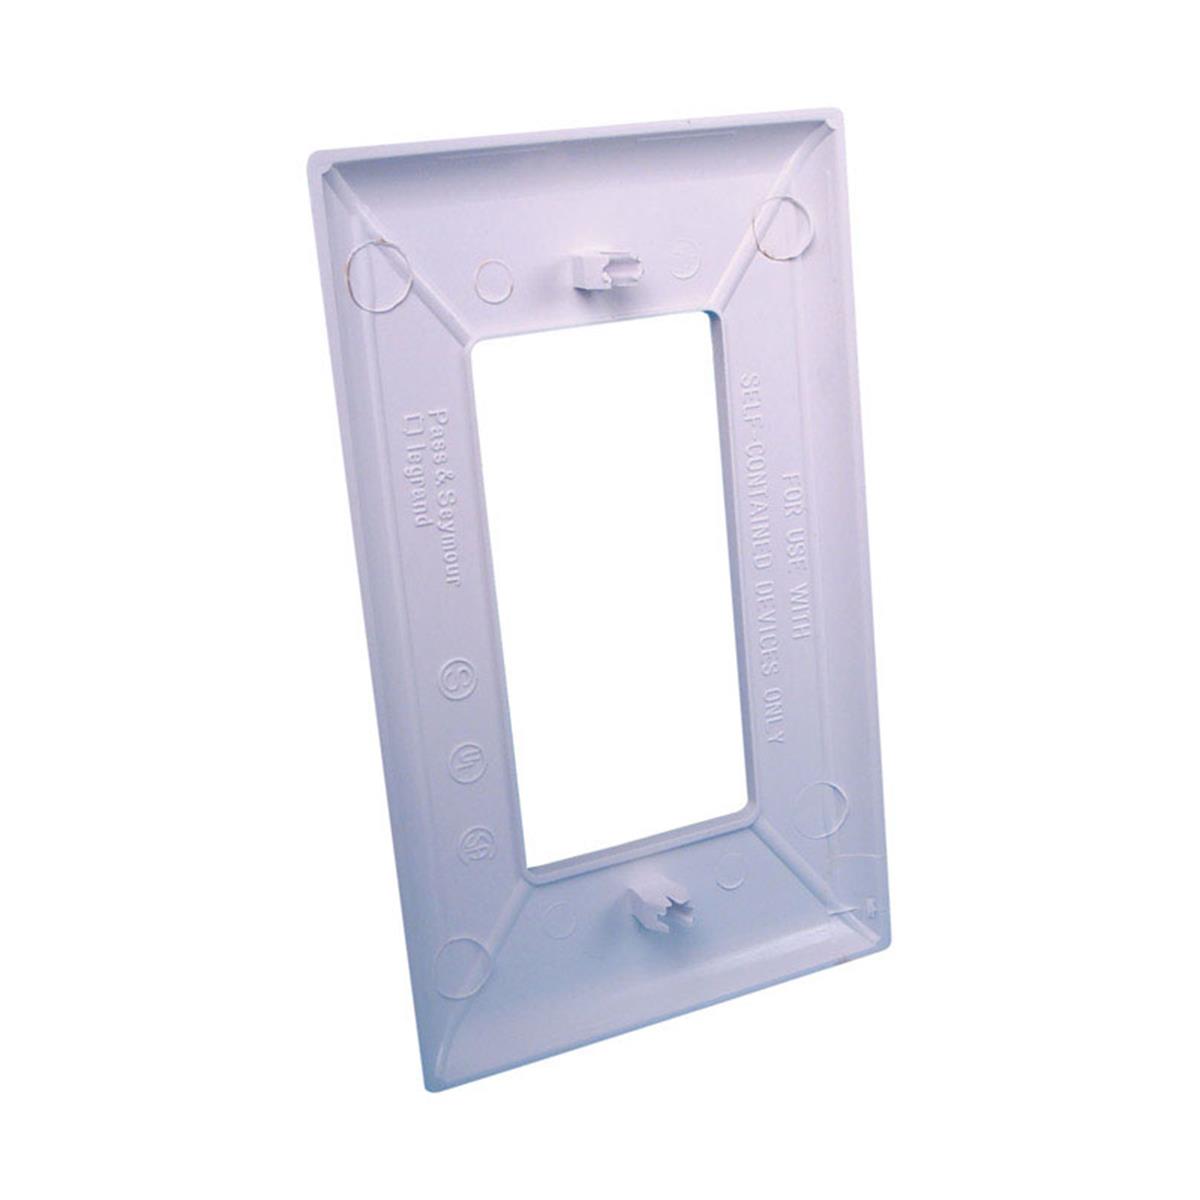 E-122c Snapon Rv Wall Plate White